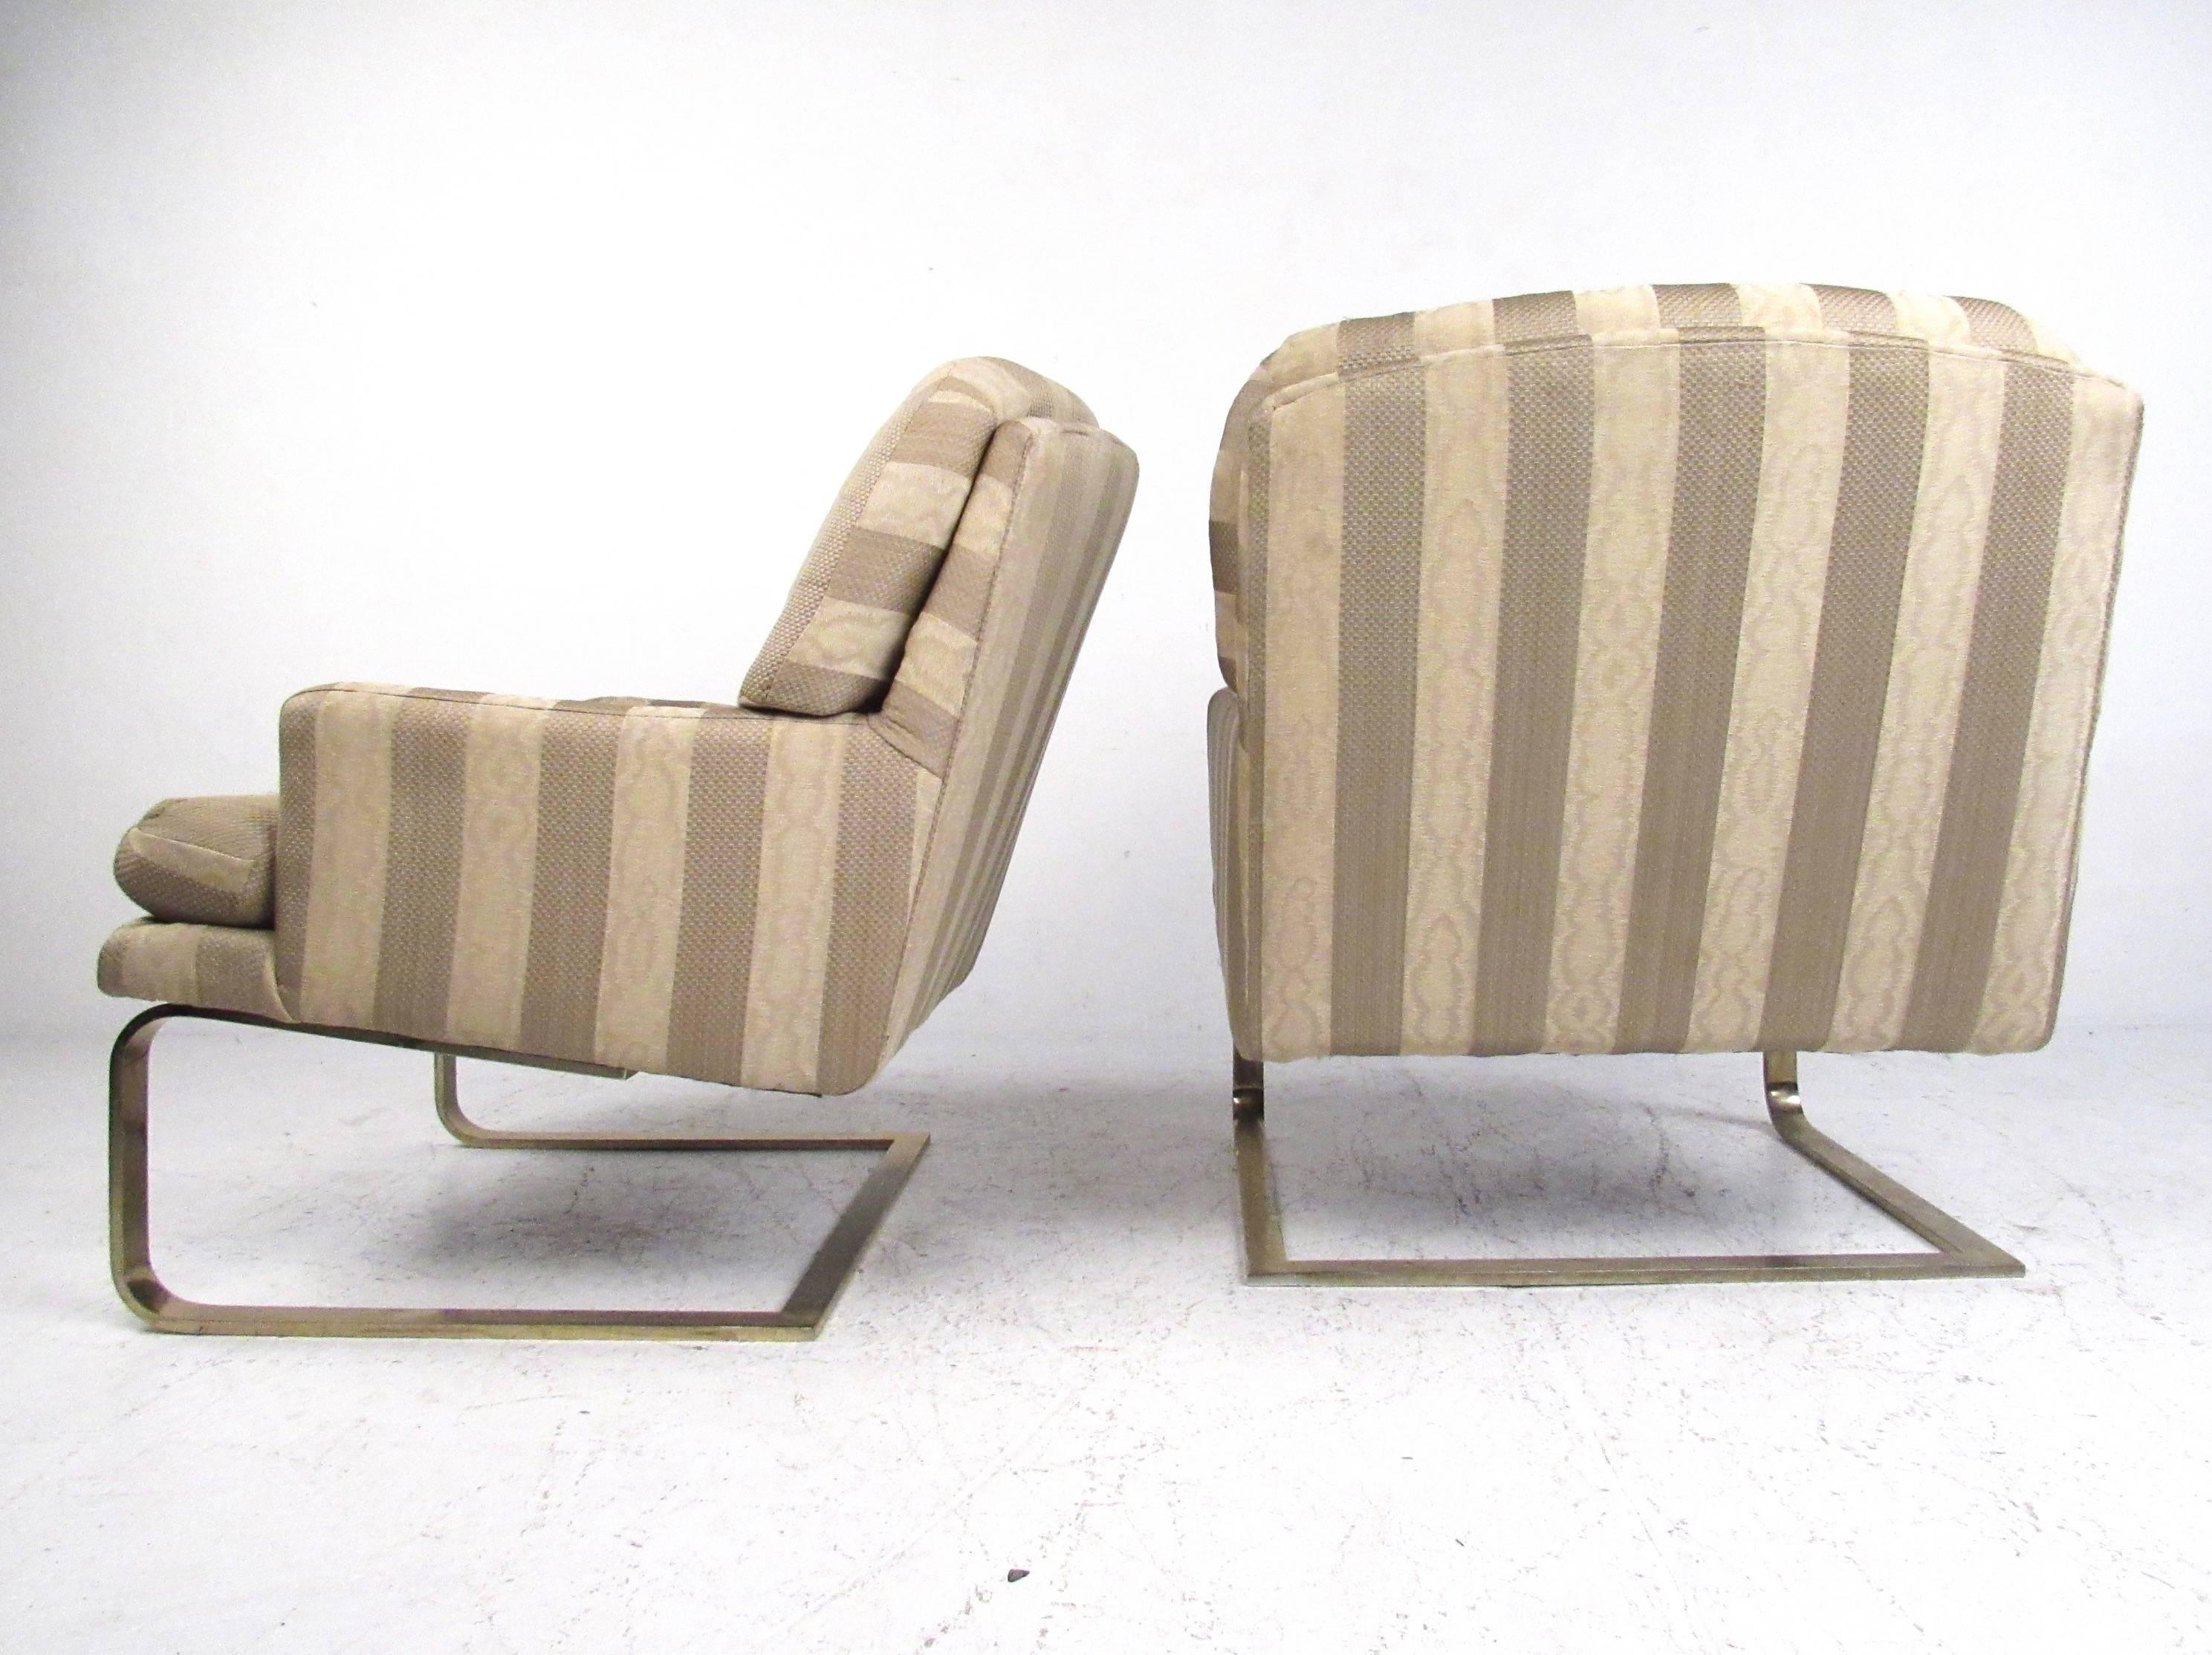 American Pair of Mid-Century Modern Cantilever Lounge Chairs by Selig